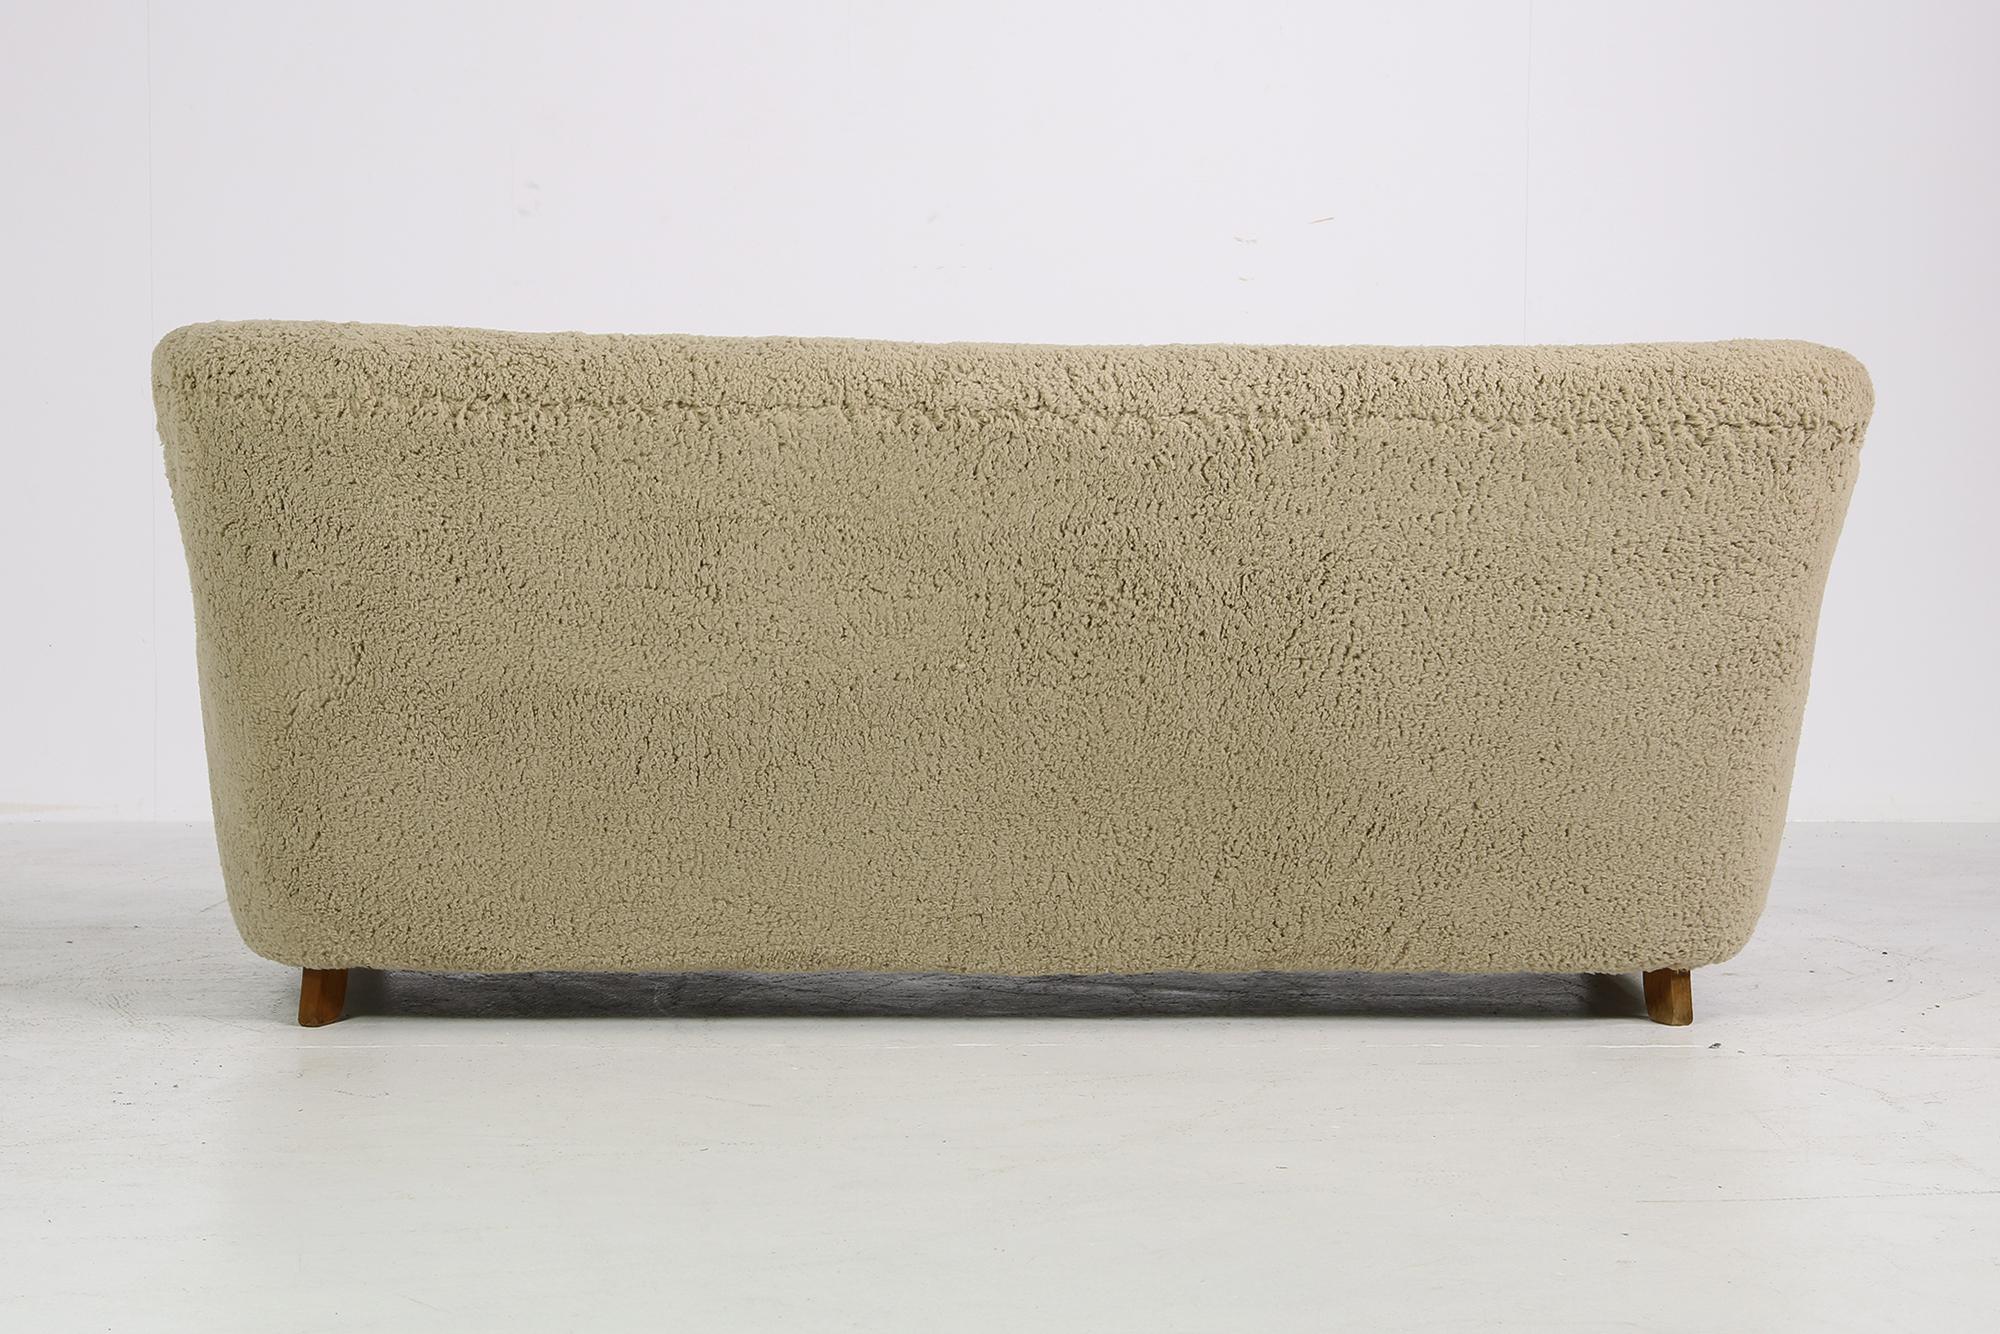 Beautiful authentic midcentury sofa. Purchased in the early 1950s in Denmark, design attributed to Mogens Lassen or Thorald Madsen, heavy weight piece, completely restored, reupholstered in old school style, covered with great teddy fur fabric, like